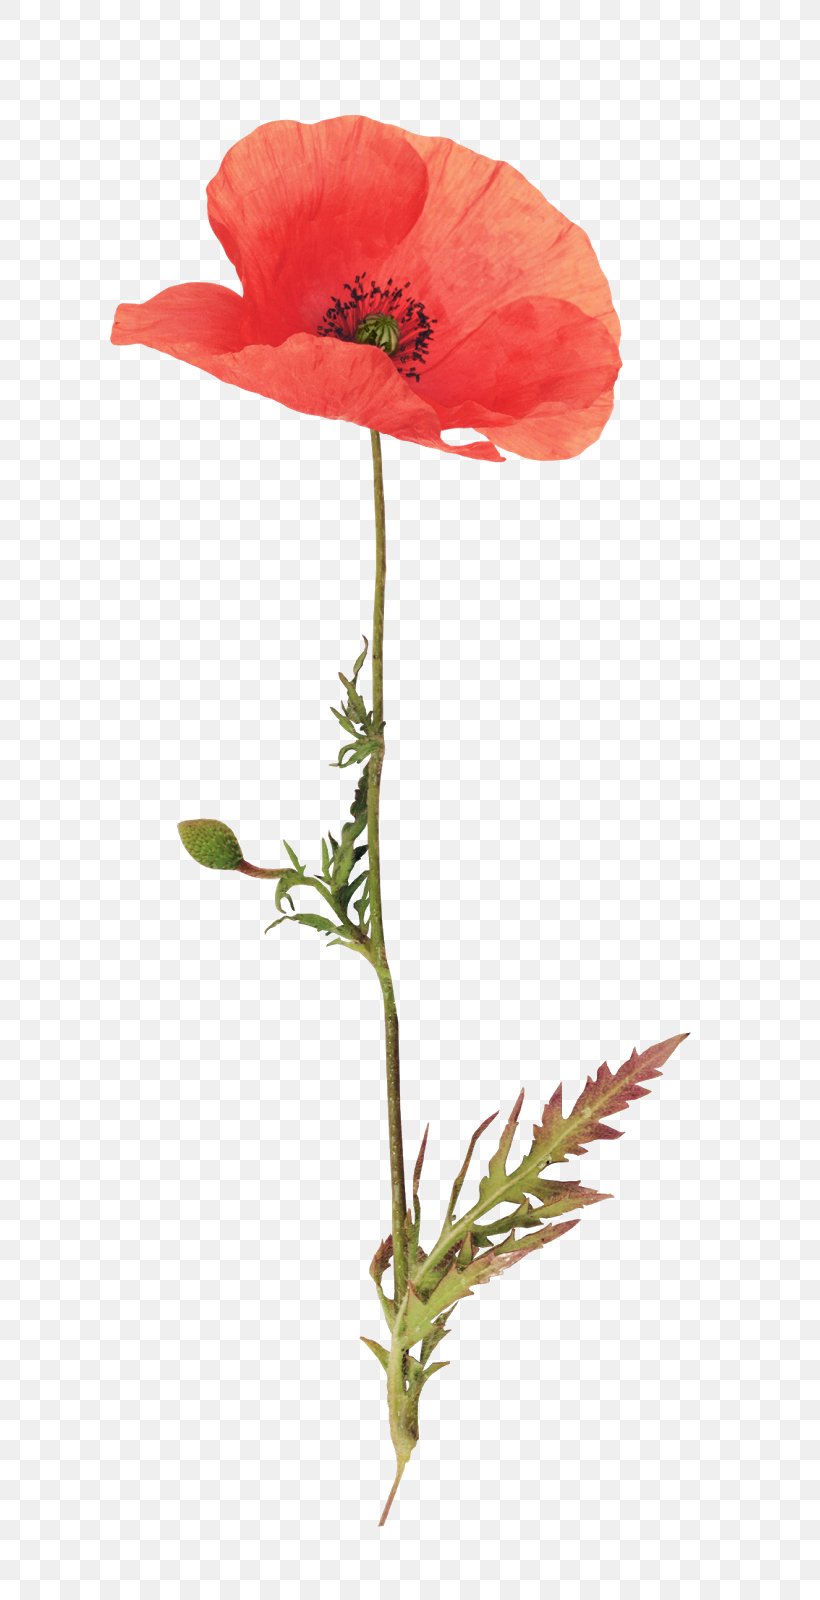 Blooming bright red poppy flowers with stem Vector Image